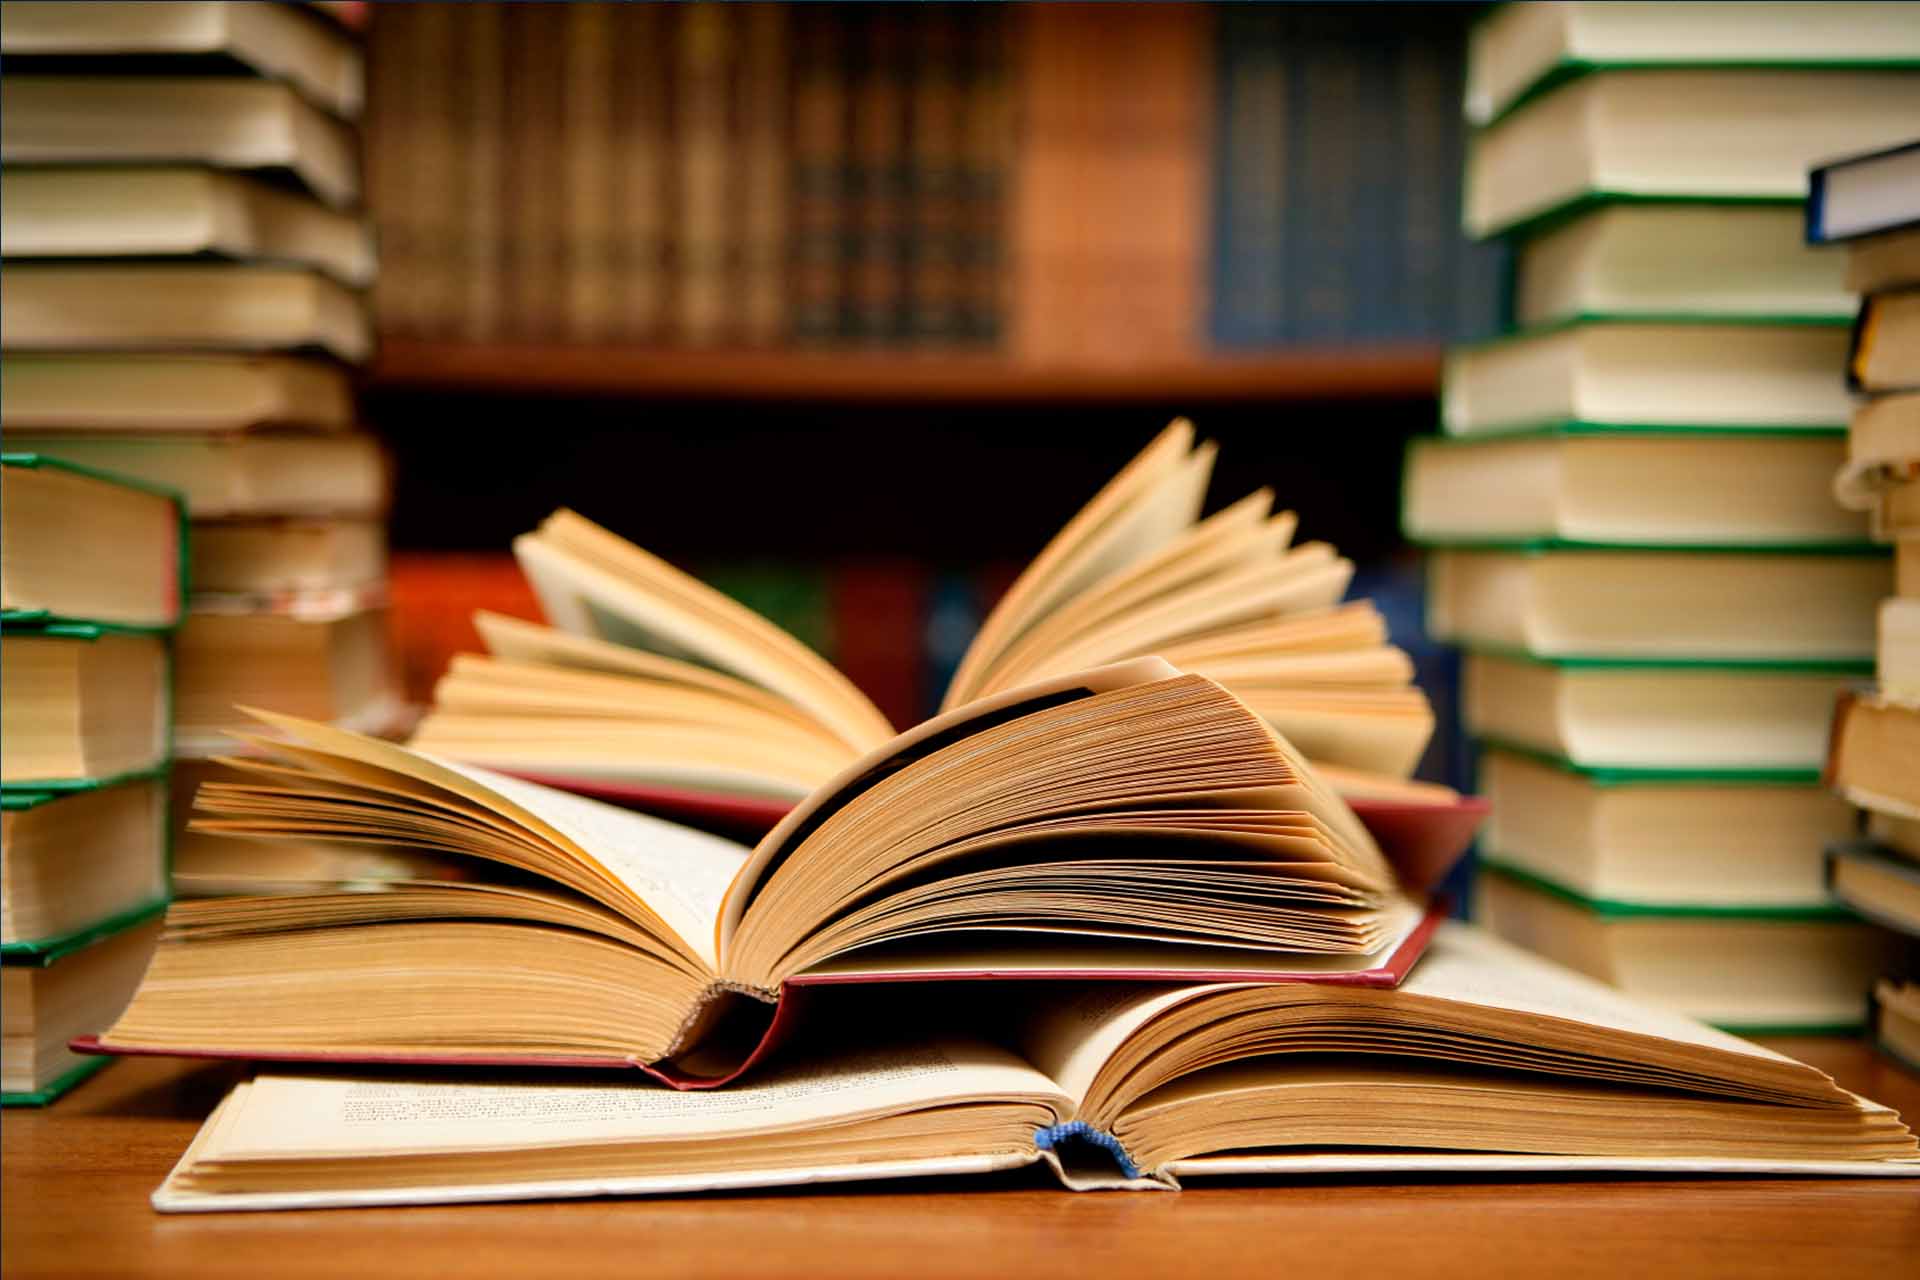 The 4 Best Fundamental Analysis Books of All Time